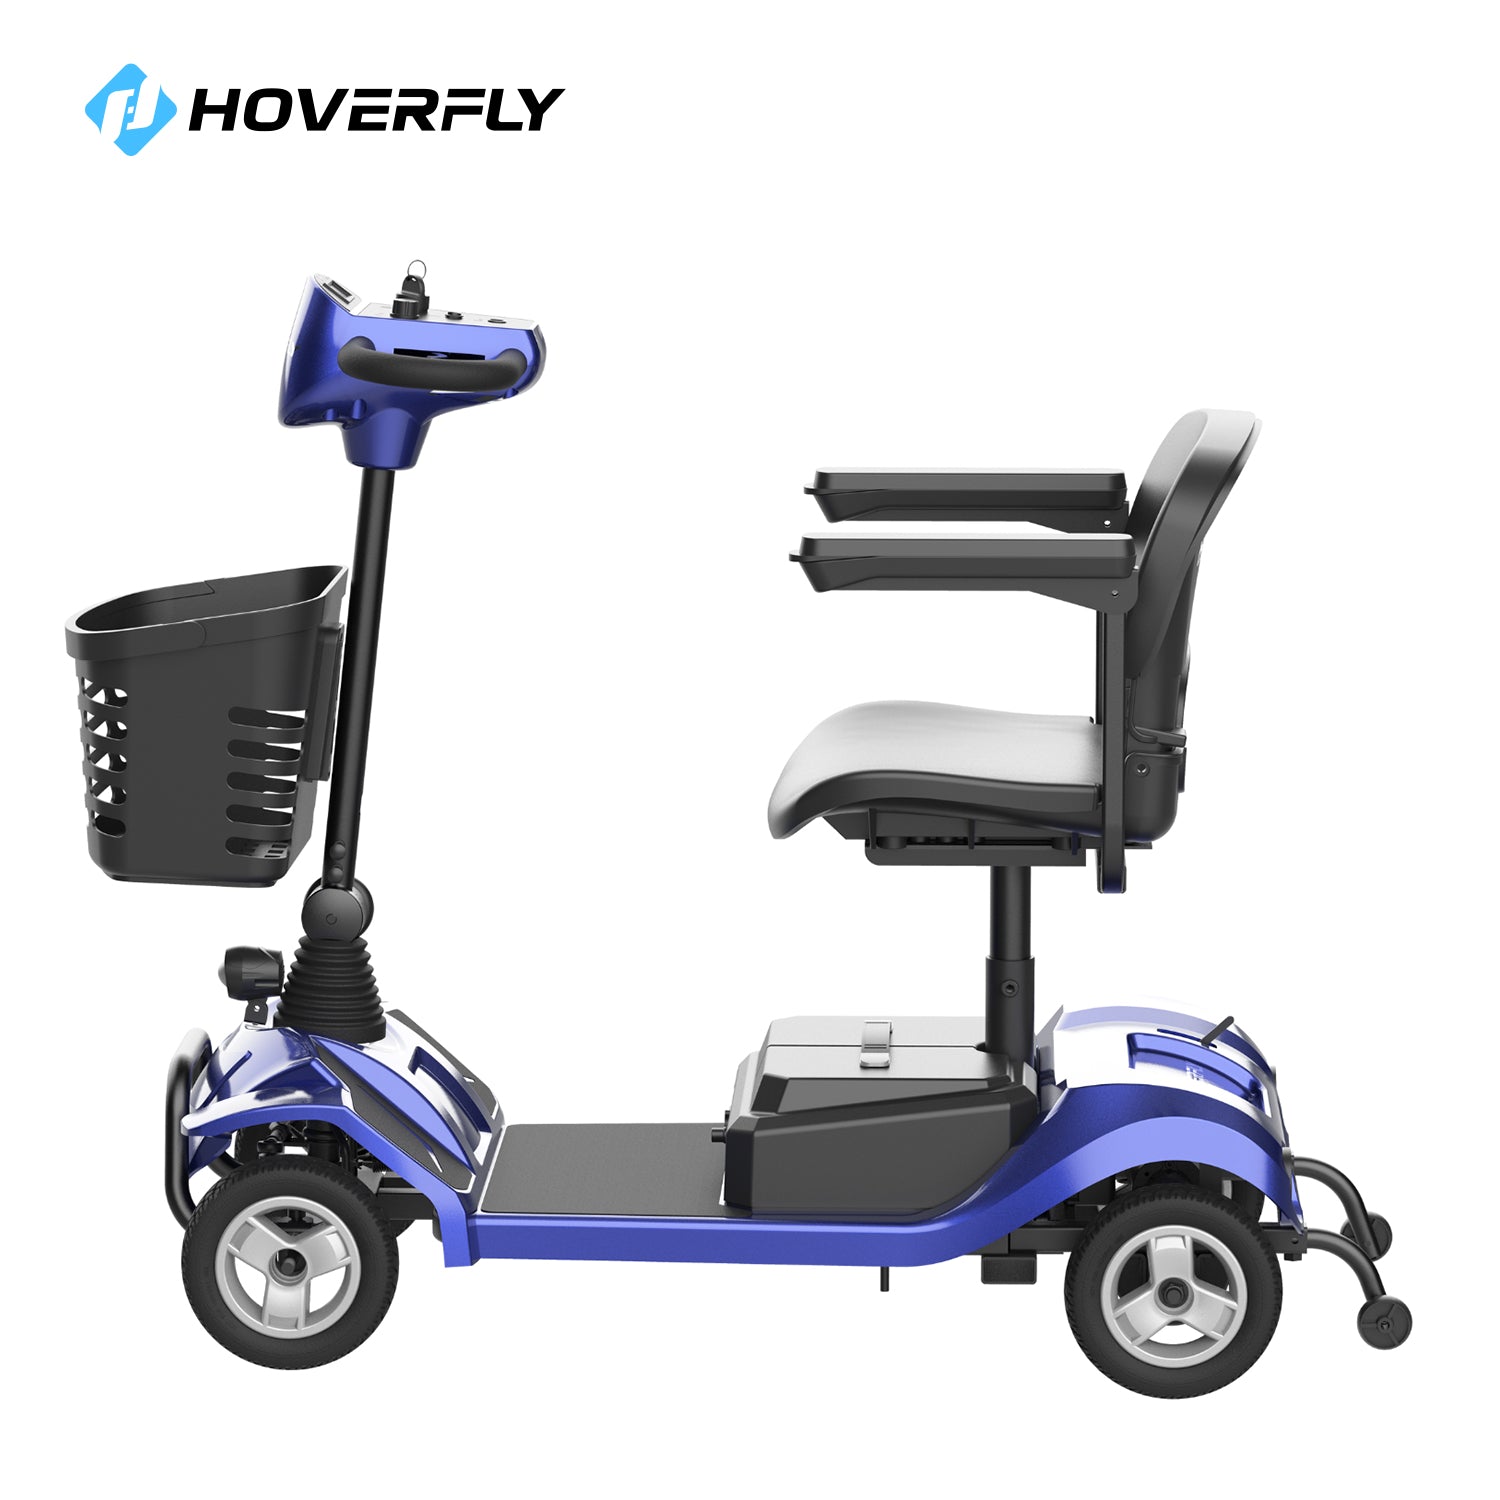 Blue Hoverfly T4 Scooter, Side Profile Showing Maneuverability and Durable Wheels.